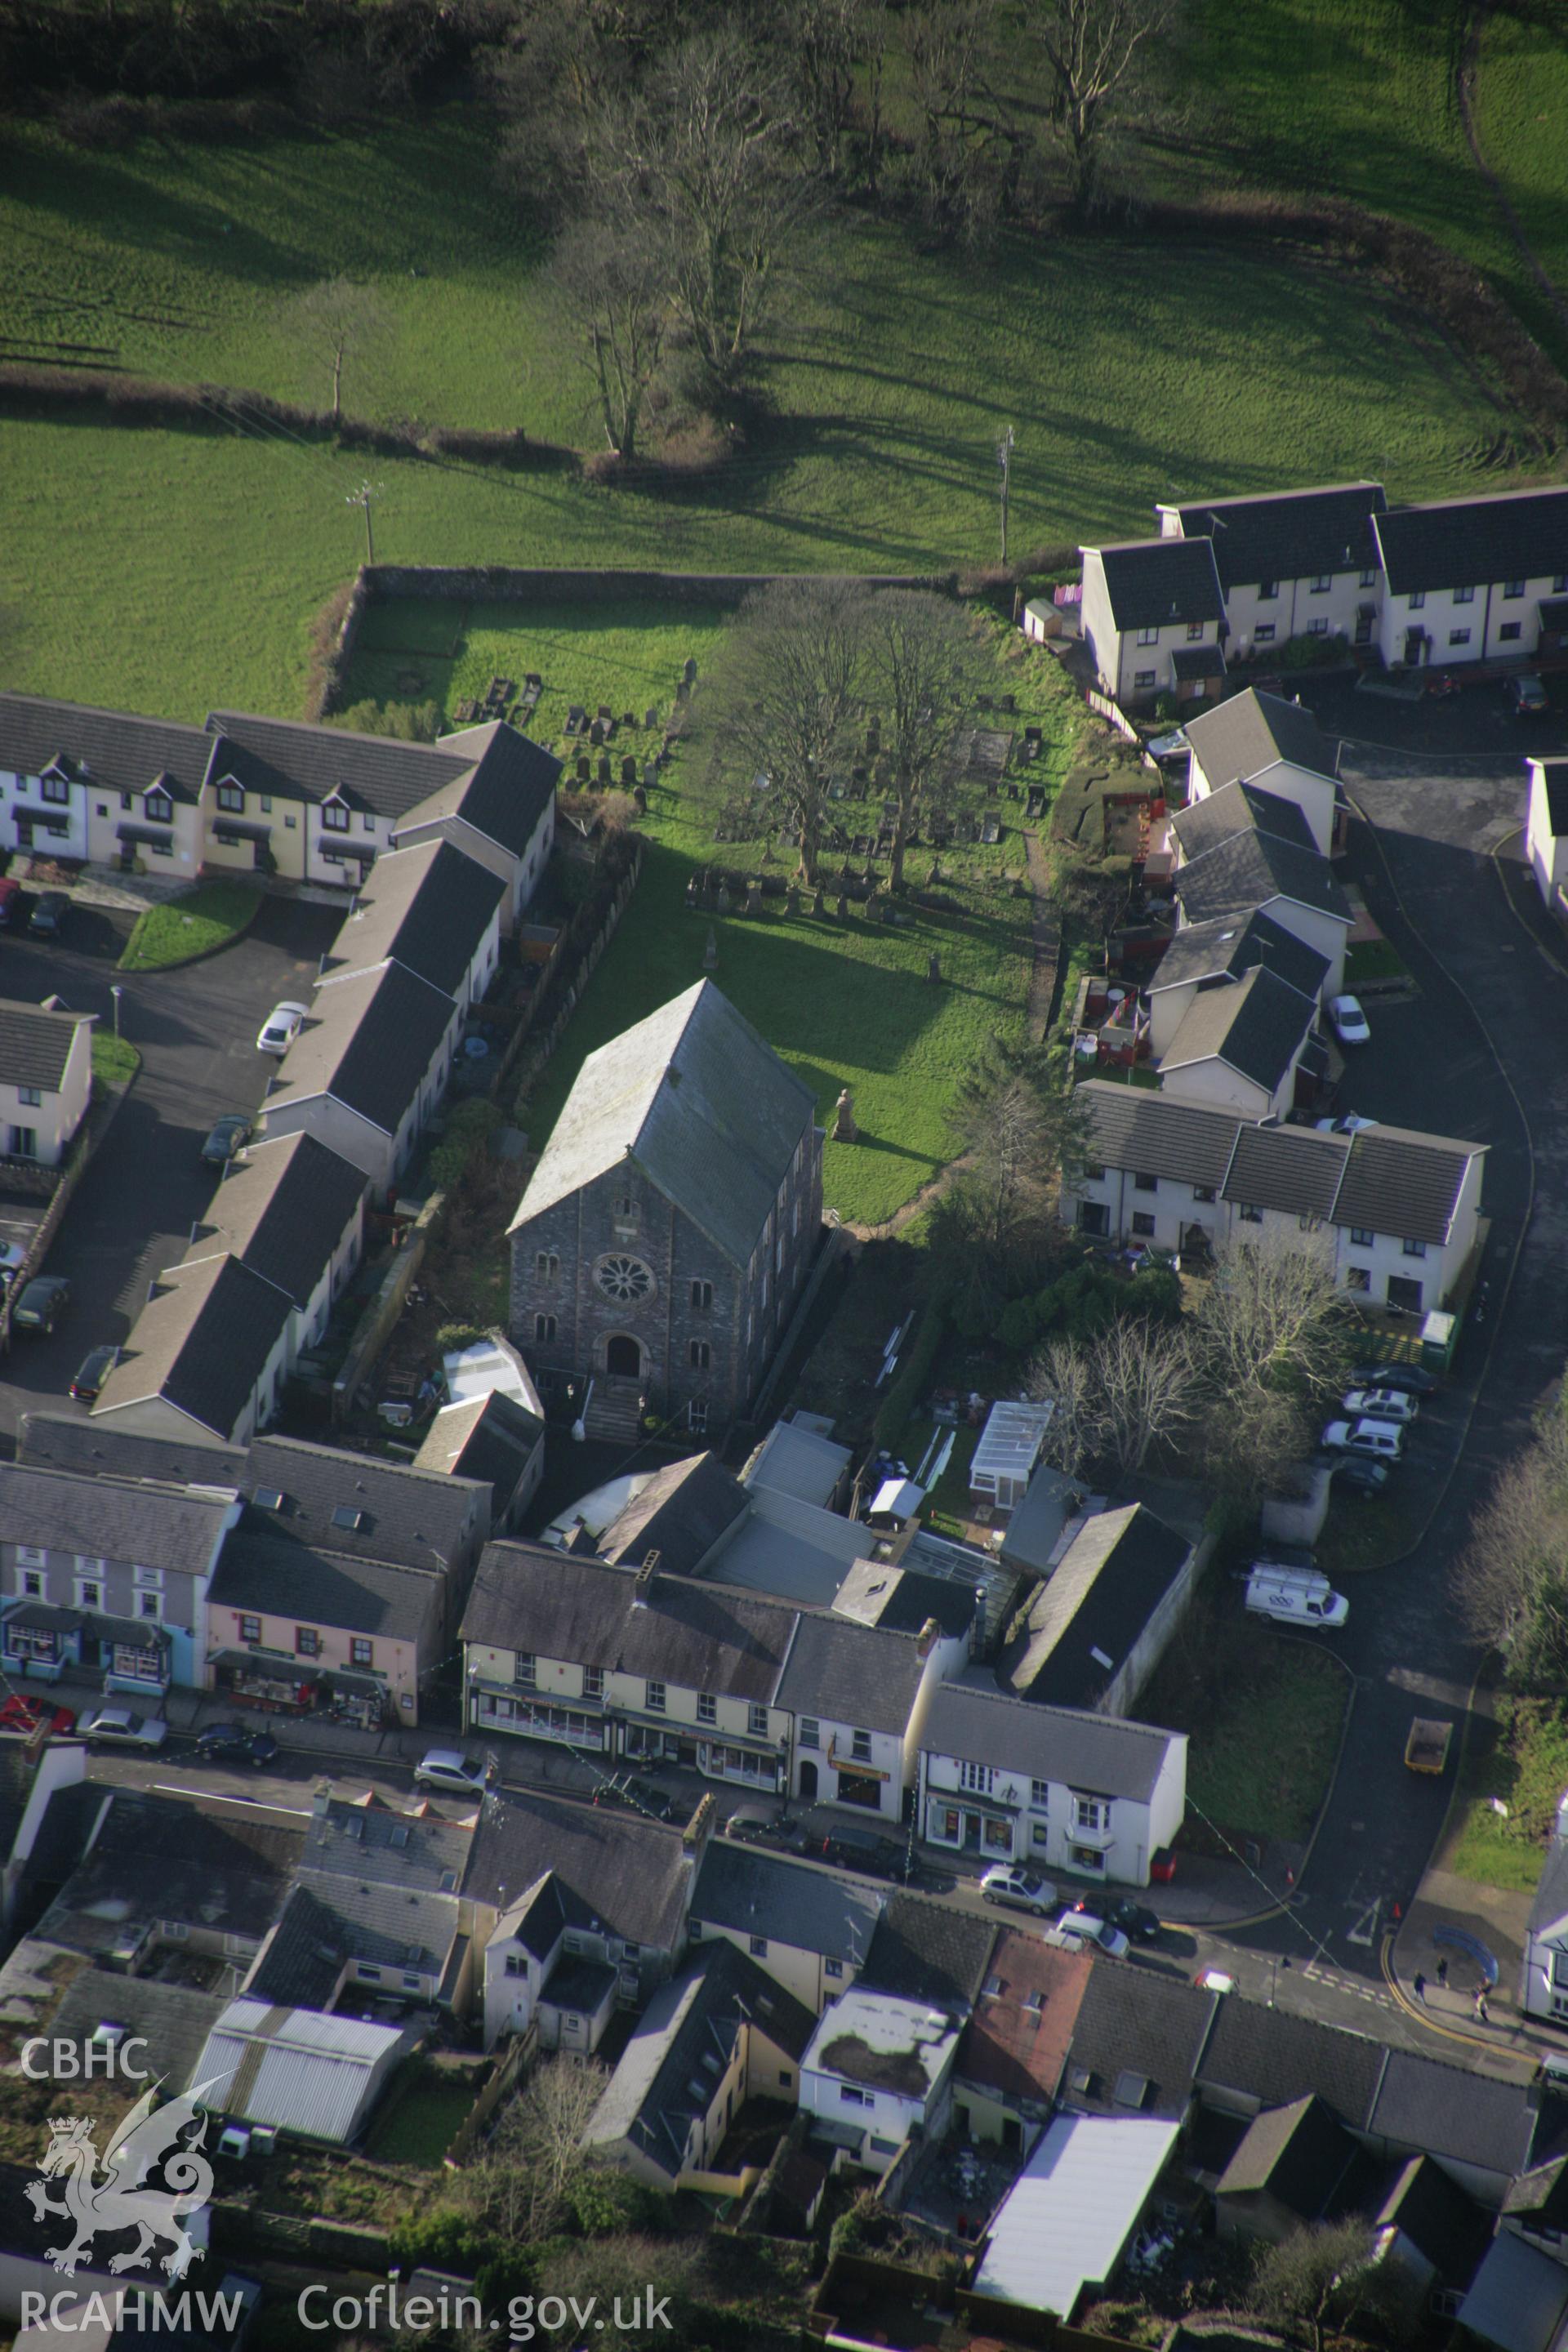 RCAHMW colour oblique aerial photograph of Bethesda English Baptist Chapel, High Street, Narberth from the east. Taken on 11 January 2006 by Toby Driver.